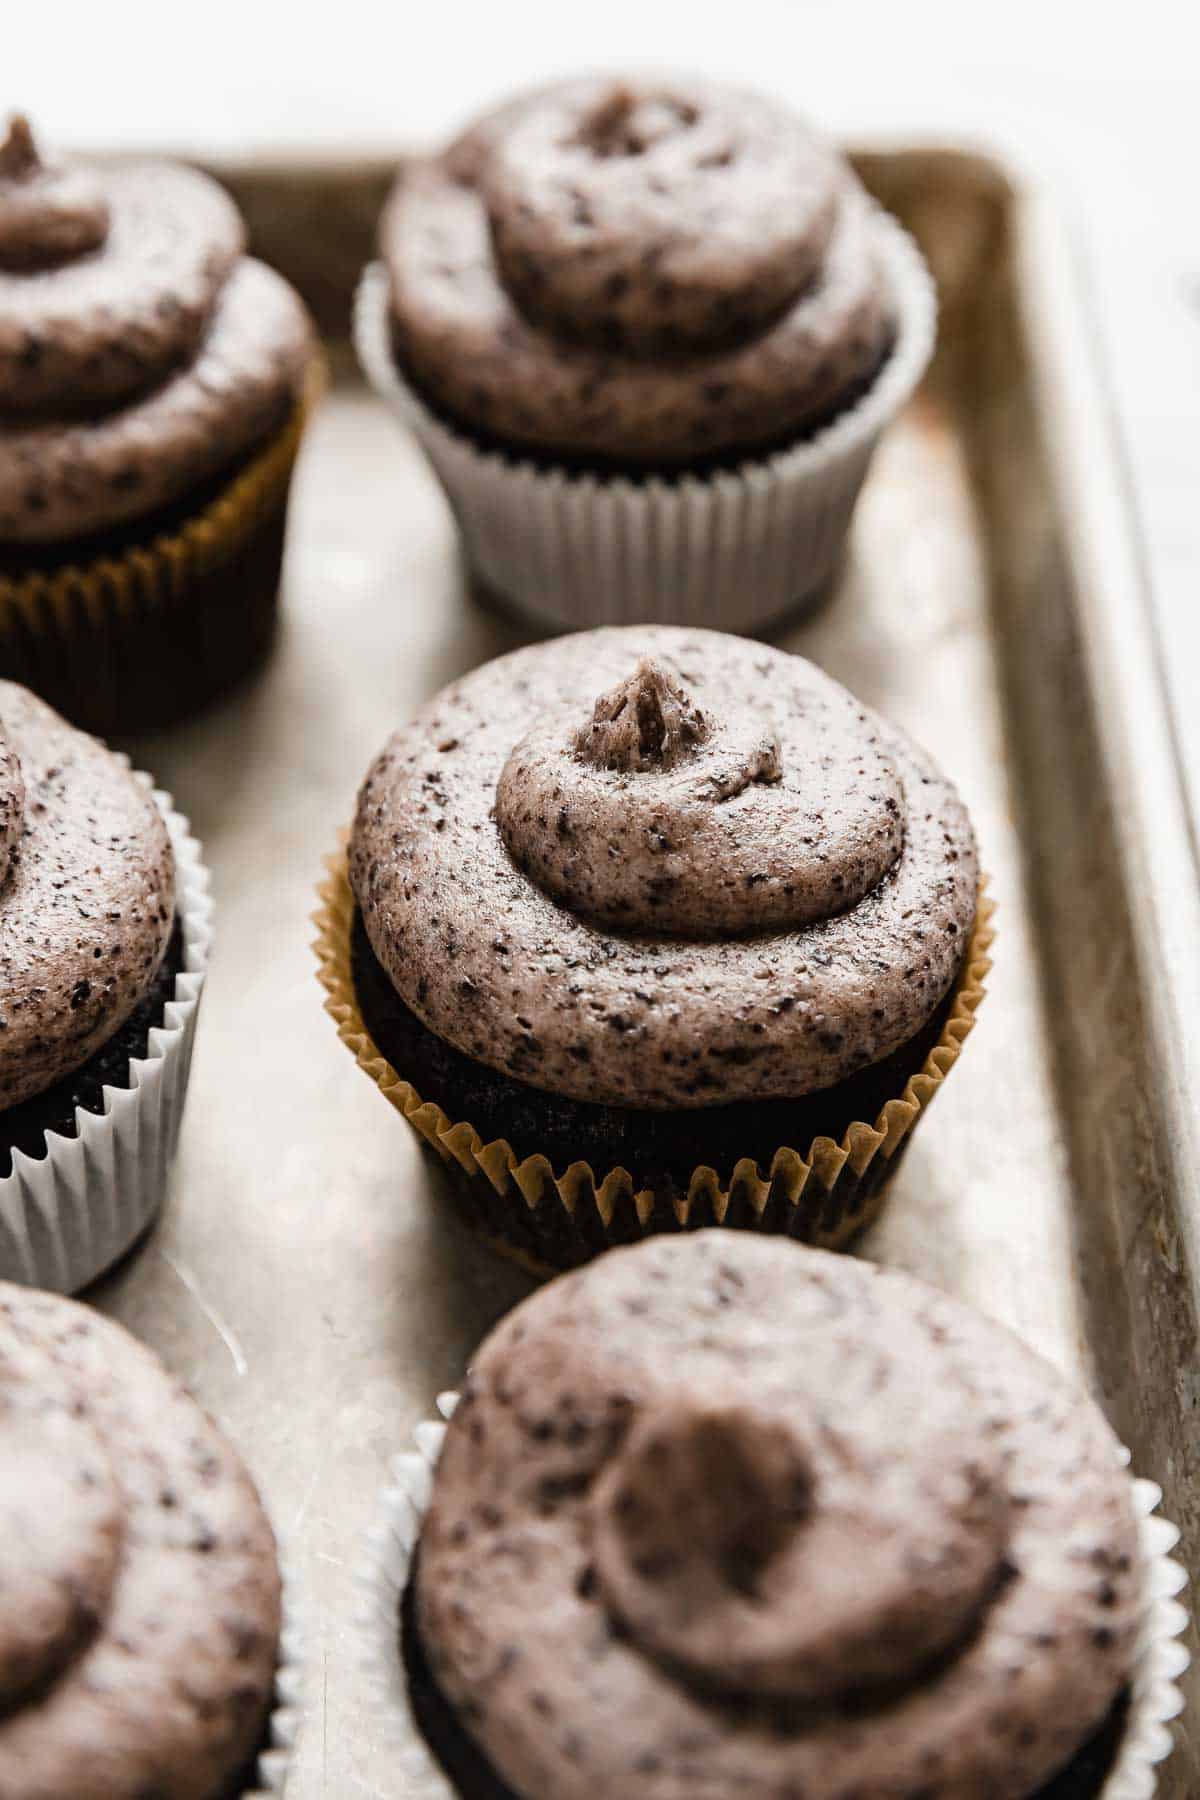 Oreo Cupcakes topped with a swirl of Oreo frosting, on a baking sheet.